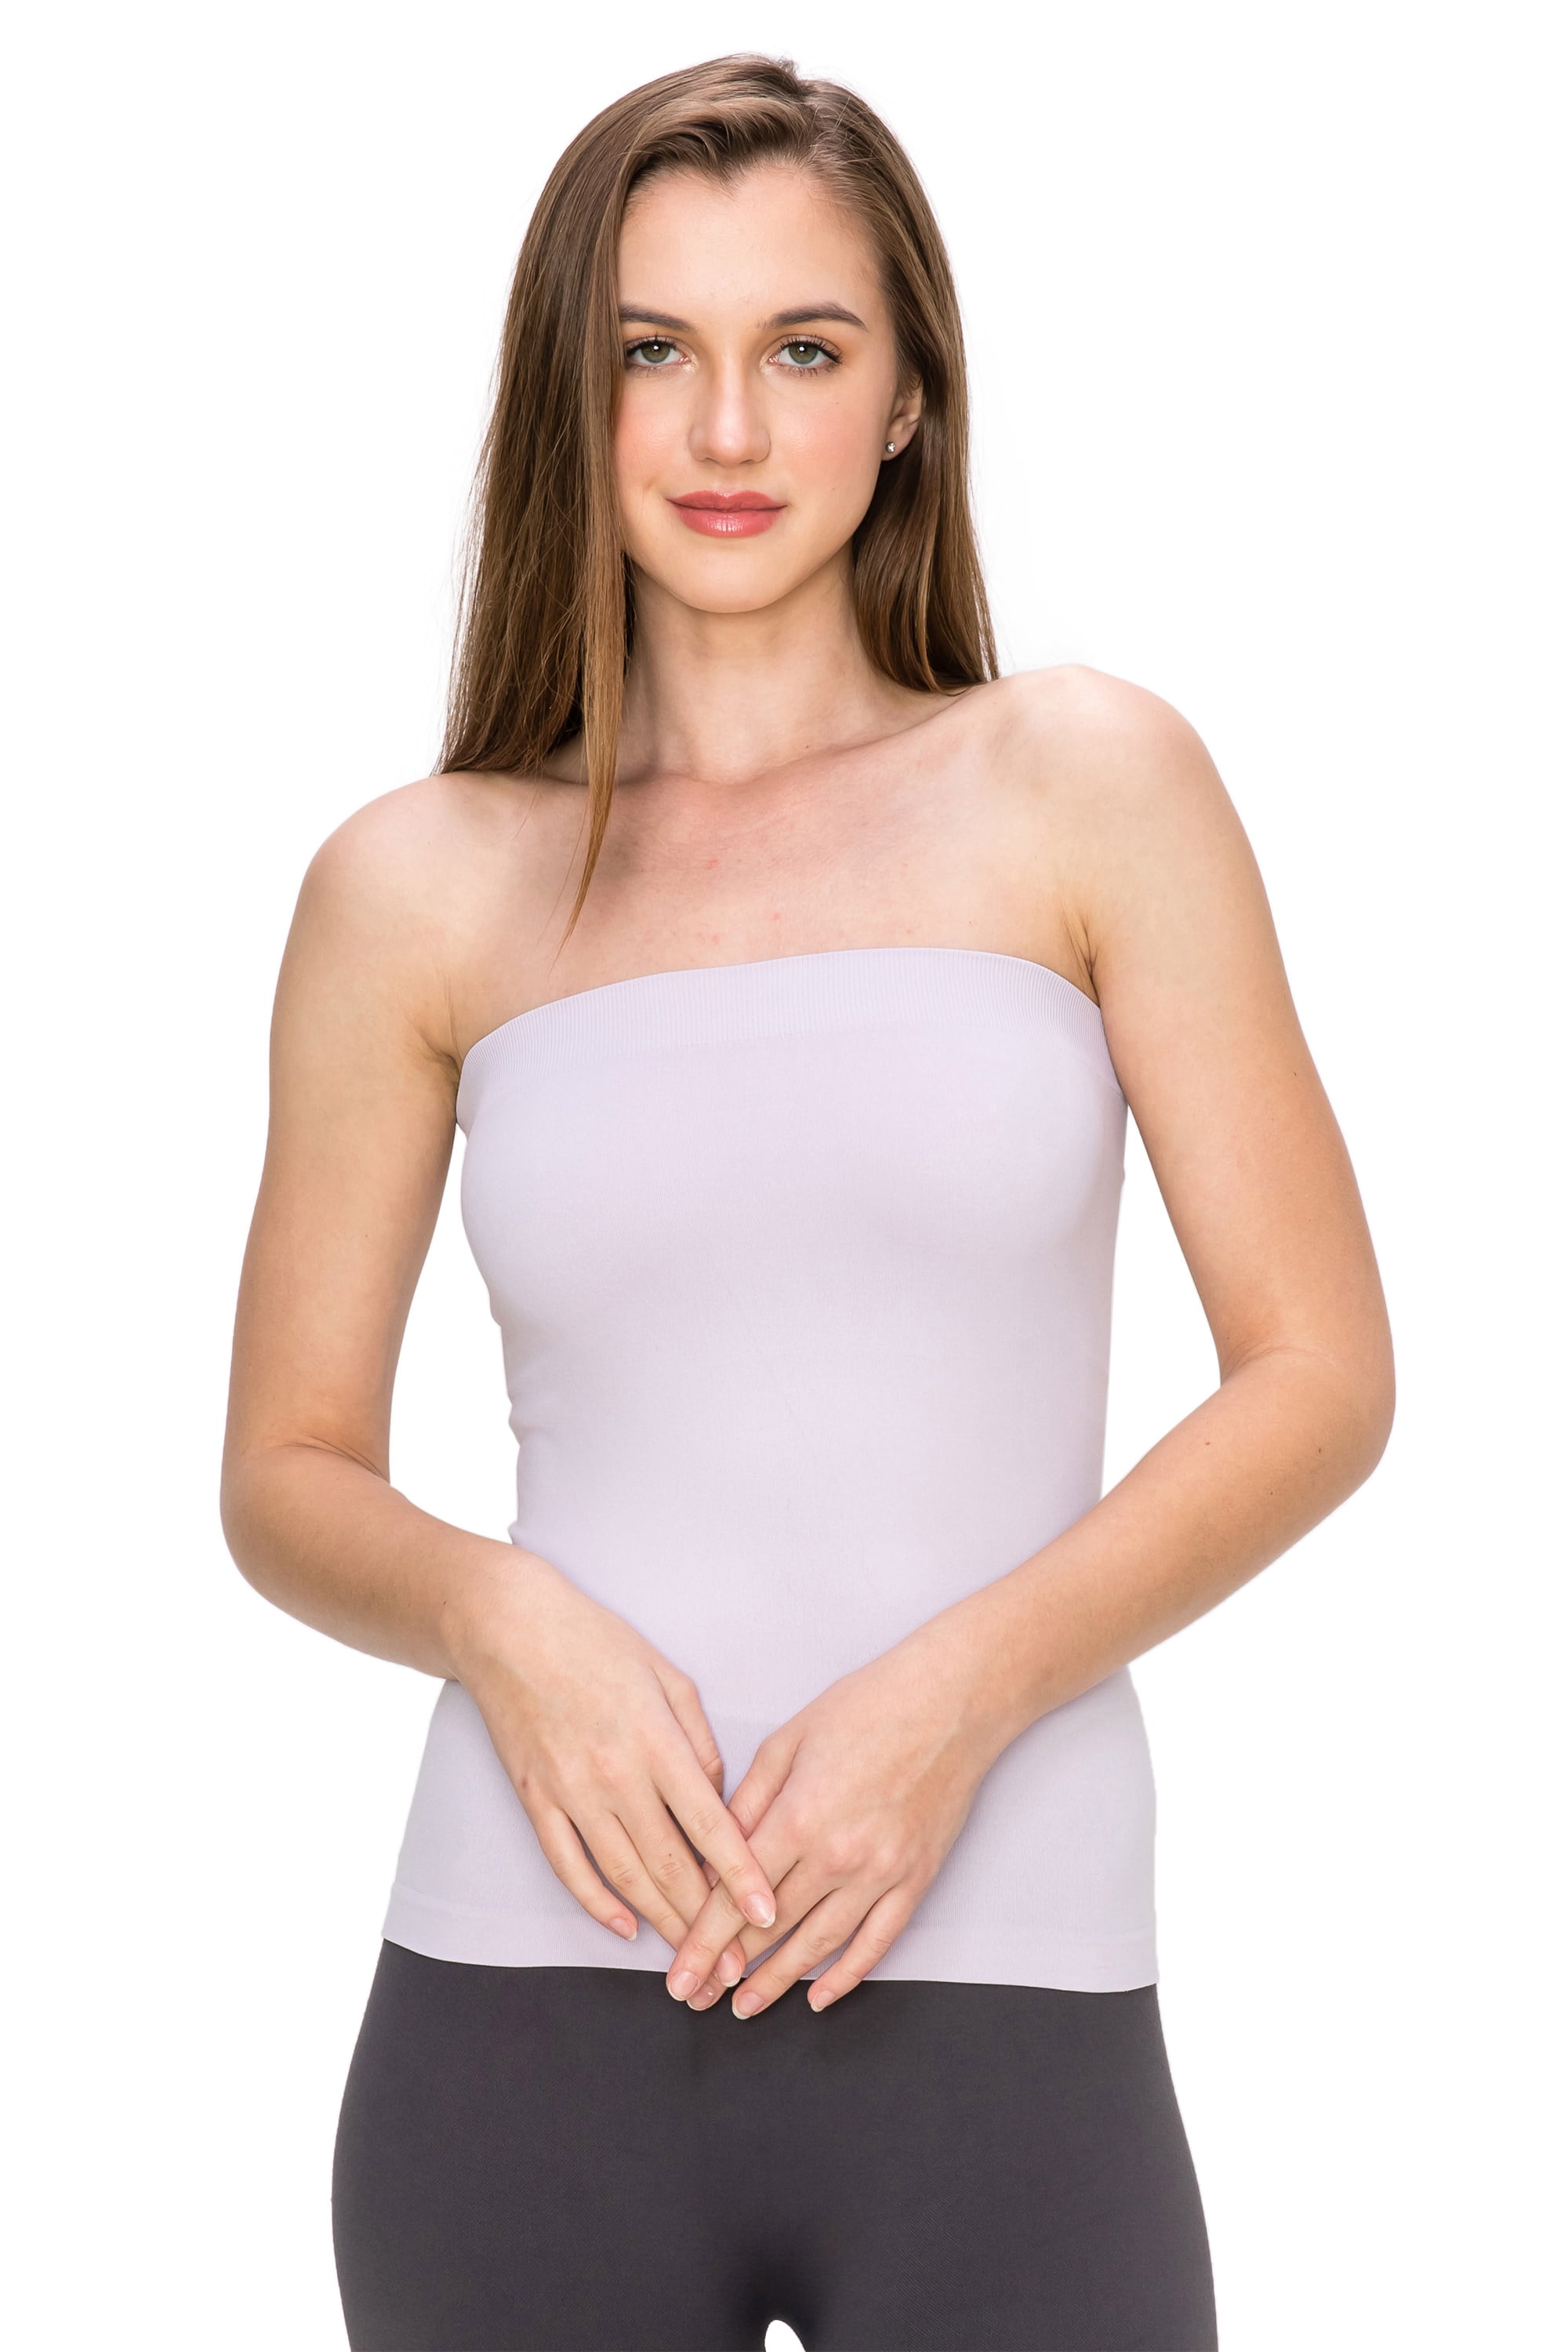 Kurve by Idea Medium Length Tube Top with Built-in Shelf Bra, UV Protective  Fabric UPF 50+ (Made with Love in The USA)